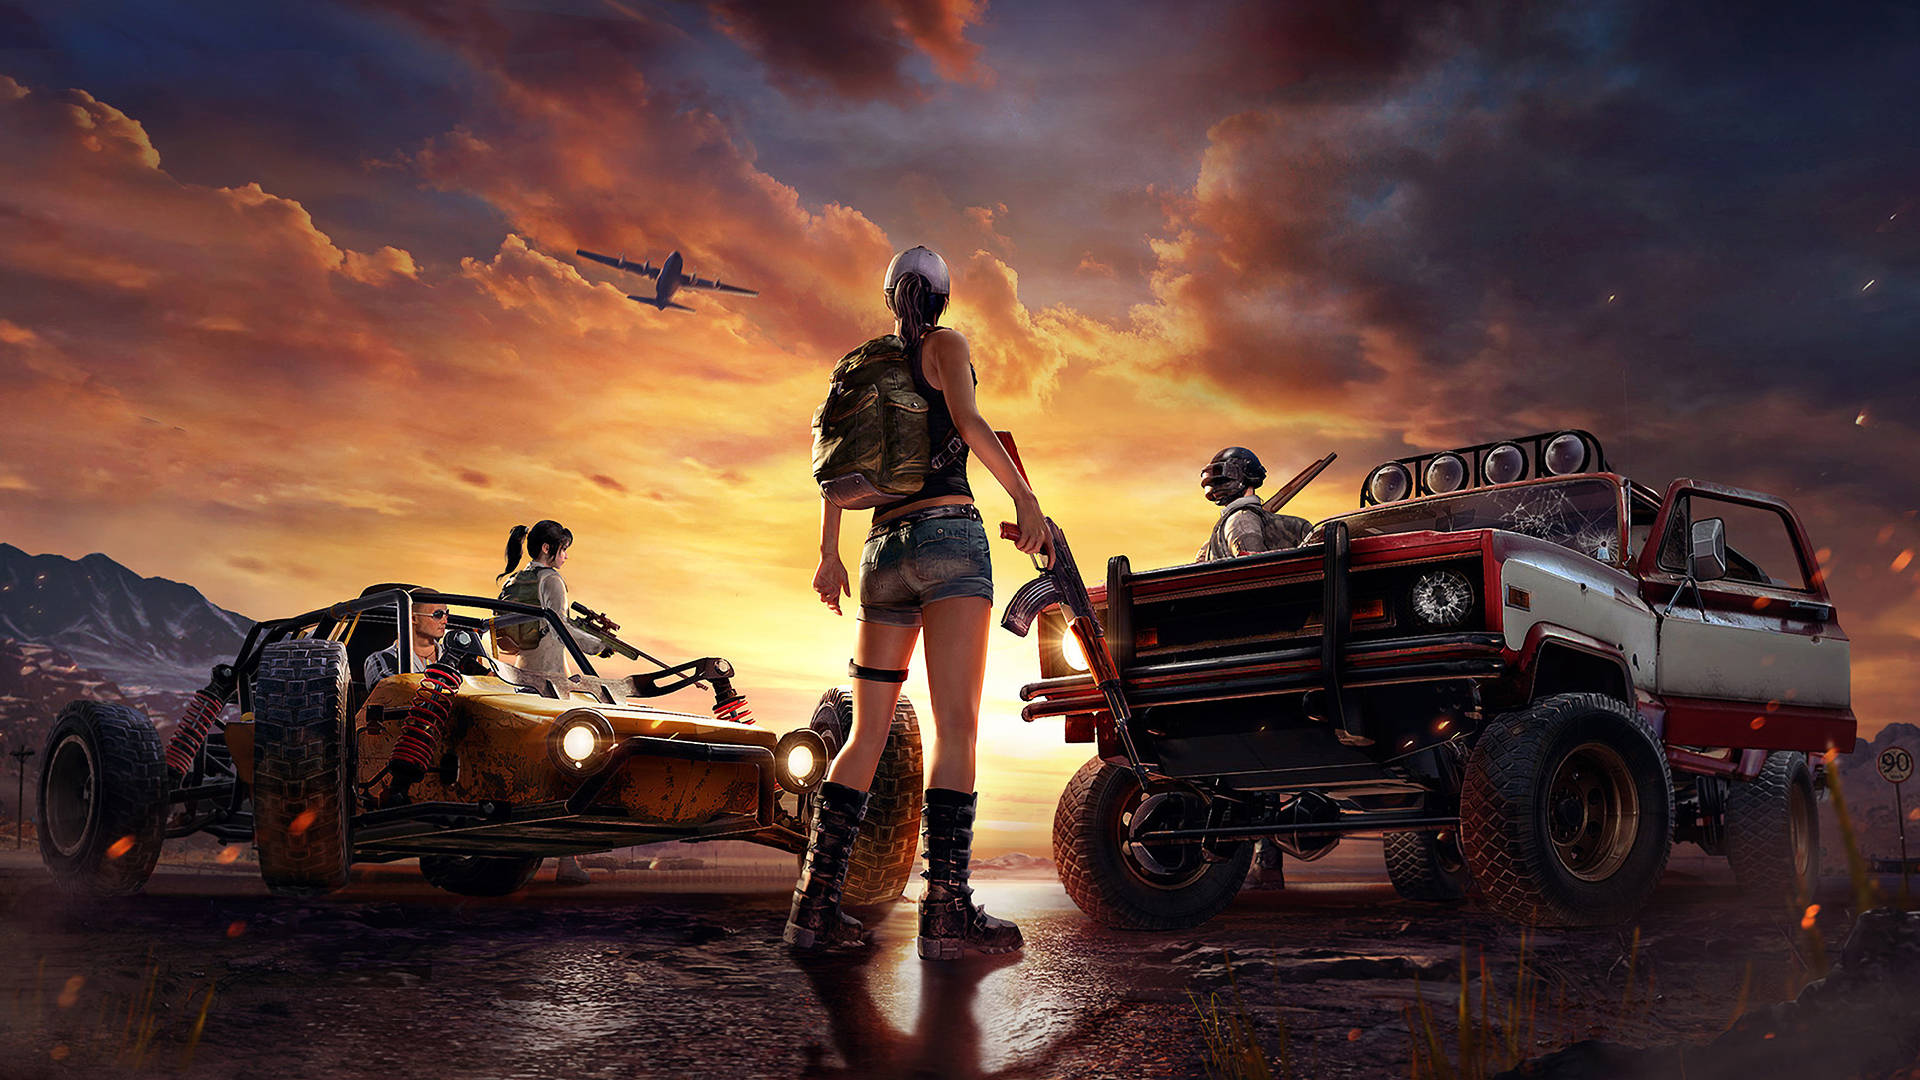 Free Pubg Wallpaper Downloads, [500+] Pubg Wallpapers for FREE |  